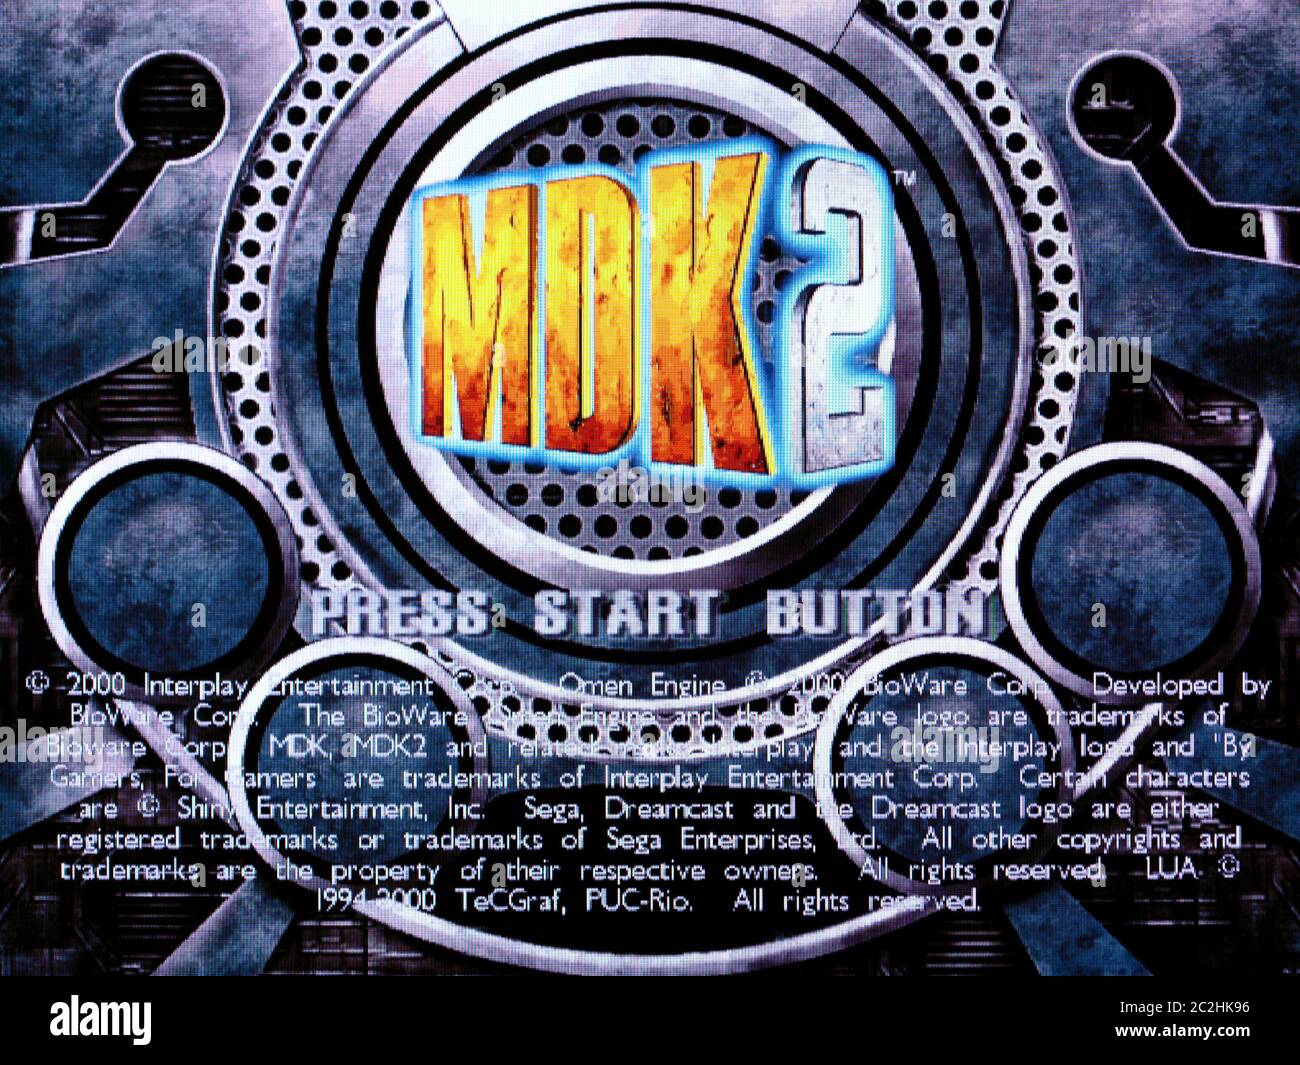 MDK 2 - Sega Dreamcast Videogame - Editorial use only Stock Photo